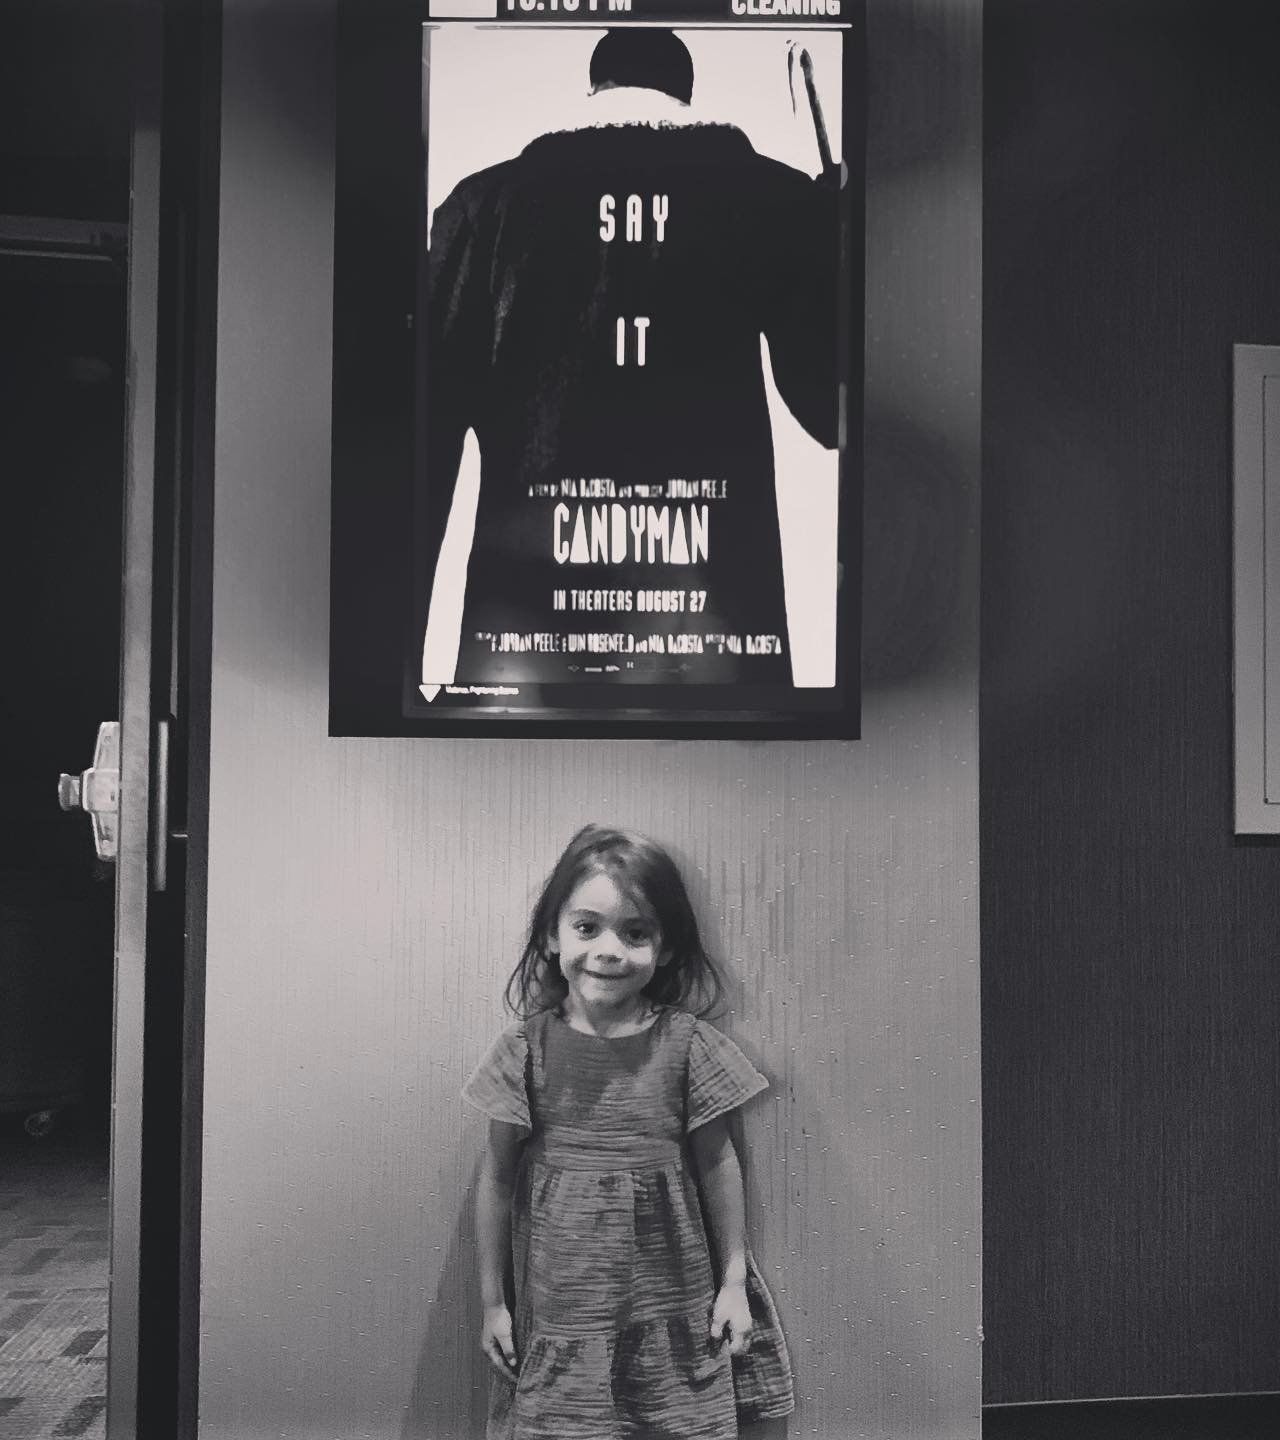 A black and white picture of Noe standing in front of a "Candyman" movie poster.